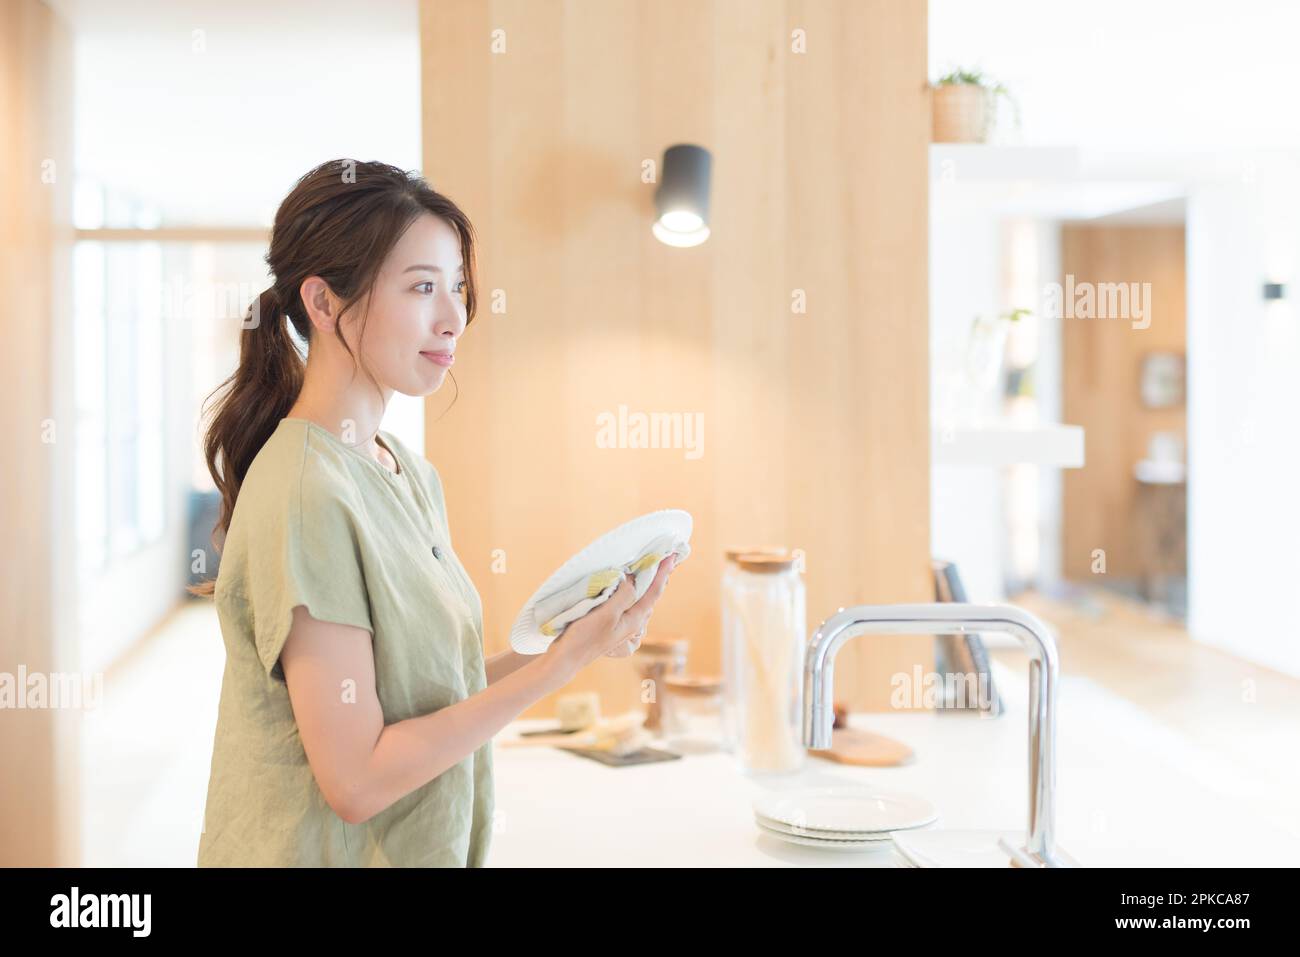 Woman wiping dishes in kitchen Stock Photo